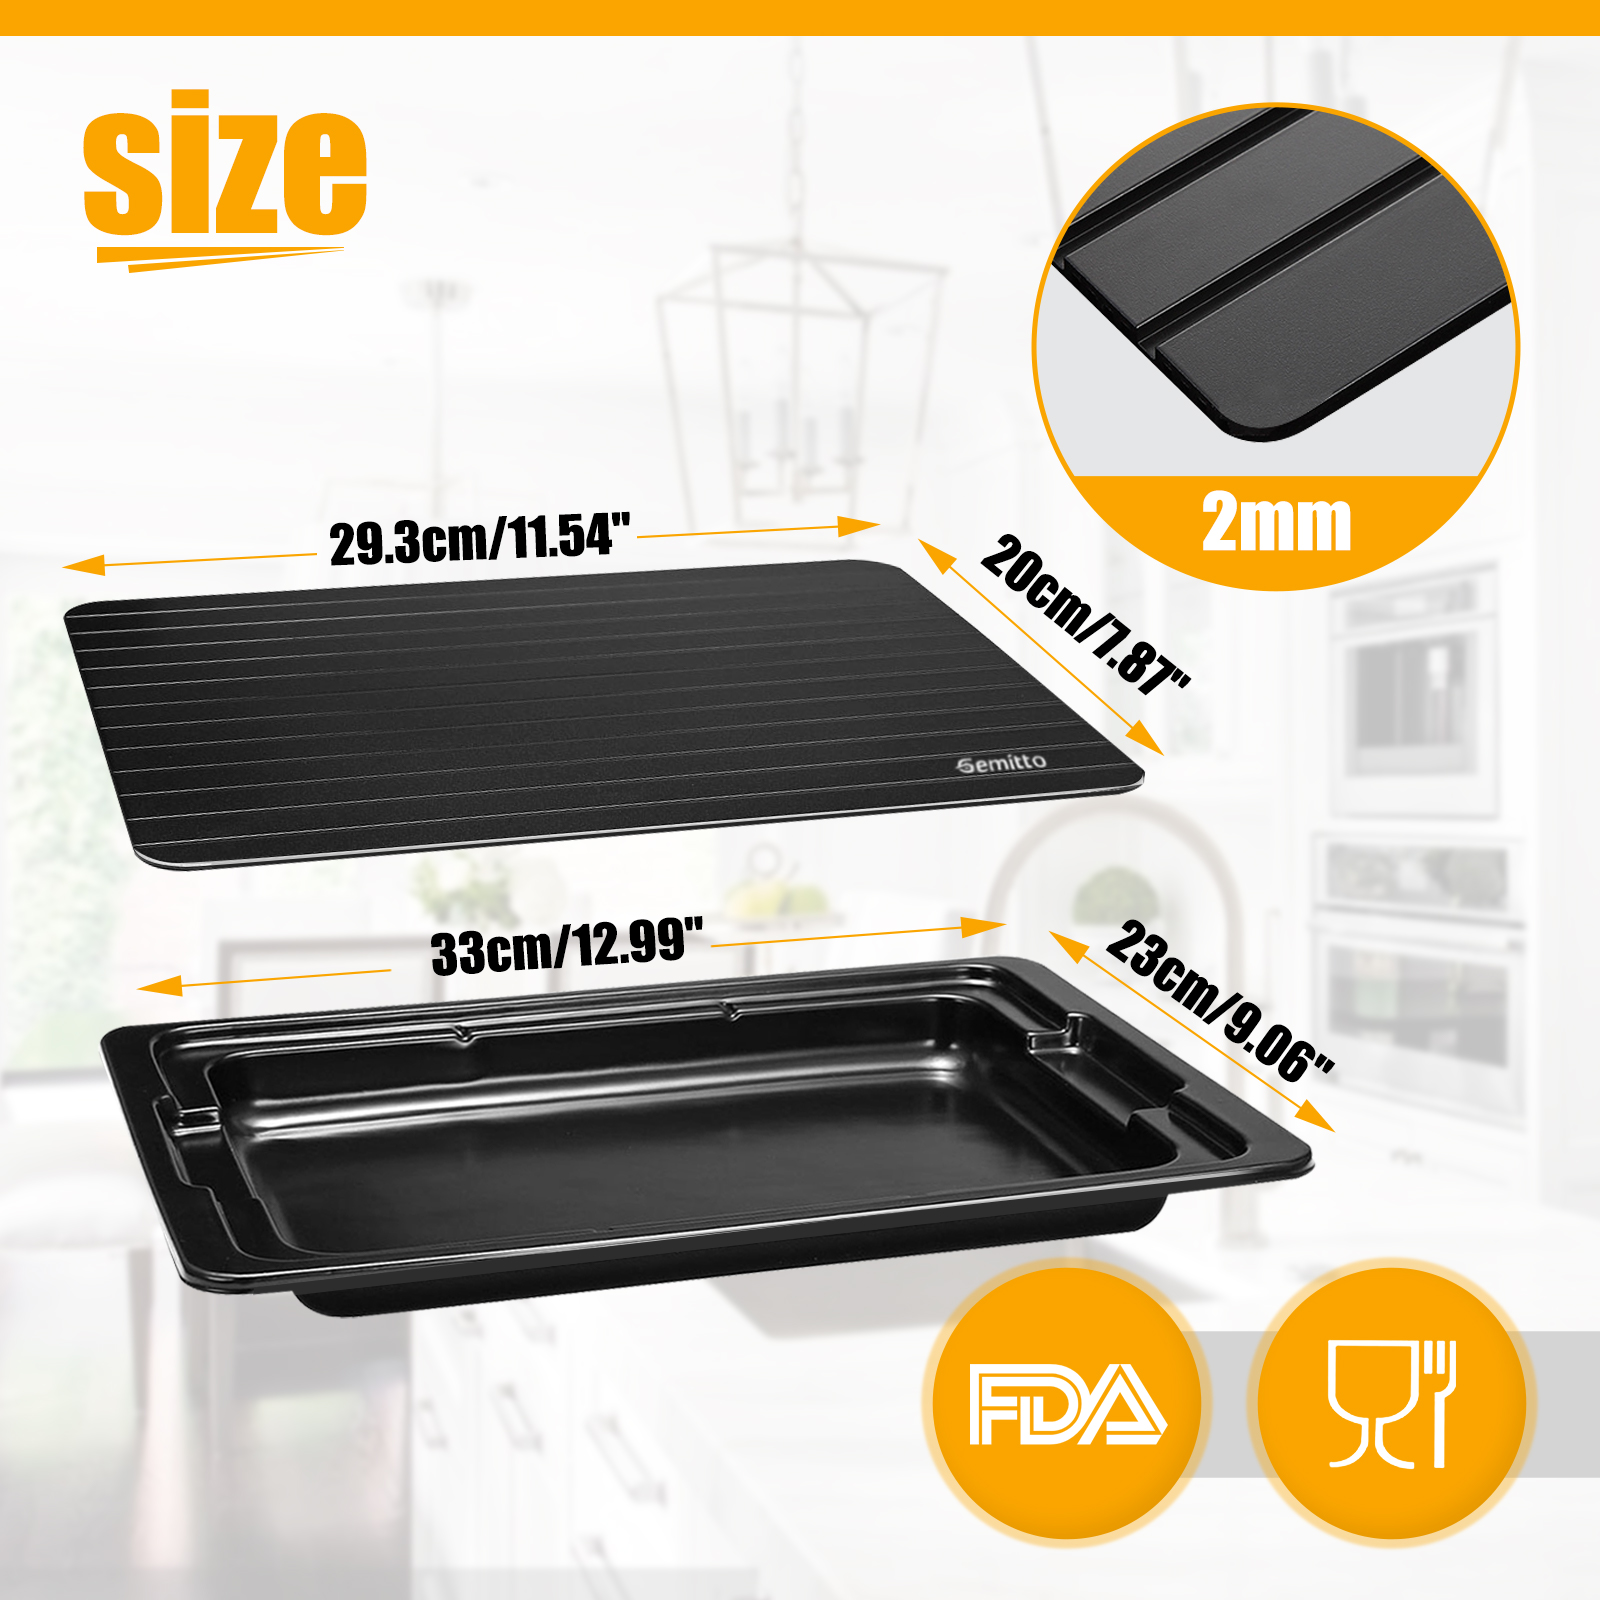 Defrosting-Tray-Thawing-Plate-Frozen-Food-Faster-and-Safer-Way-to-Defrost-Meat-or-Frozen-Food-Plate-1344447-14